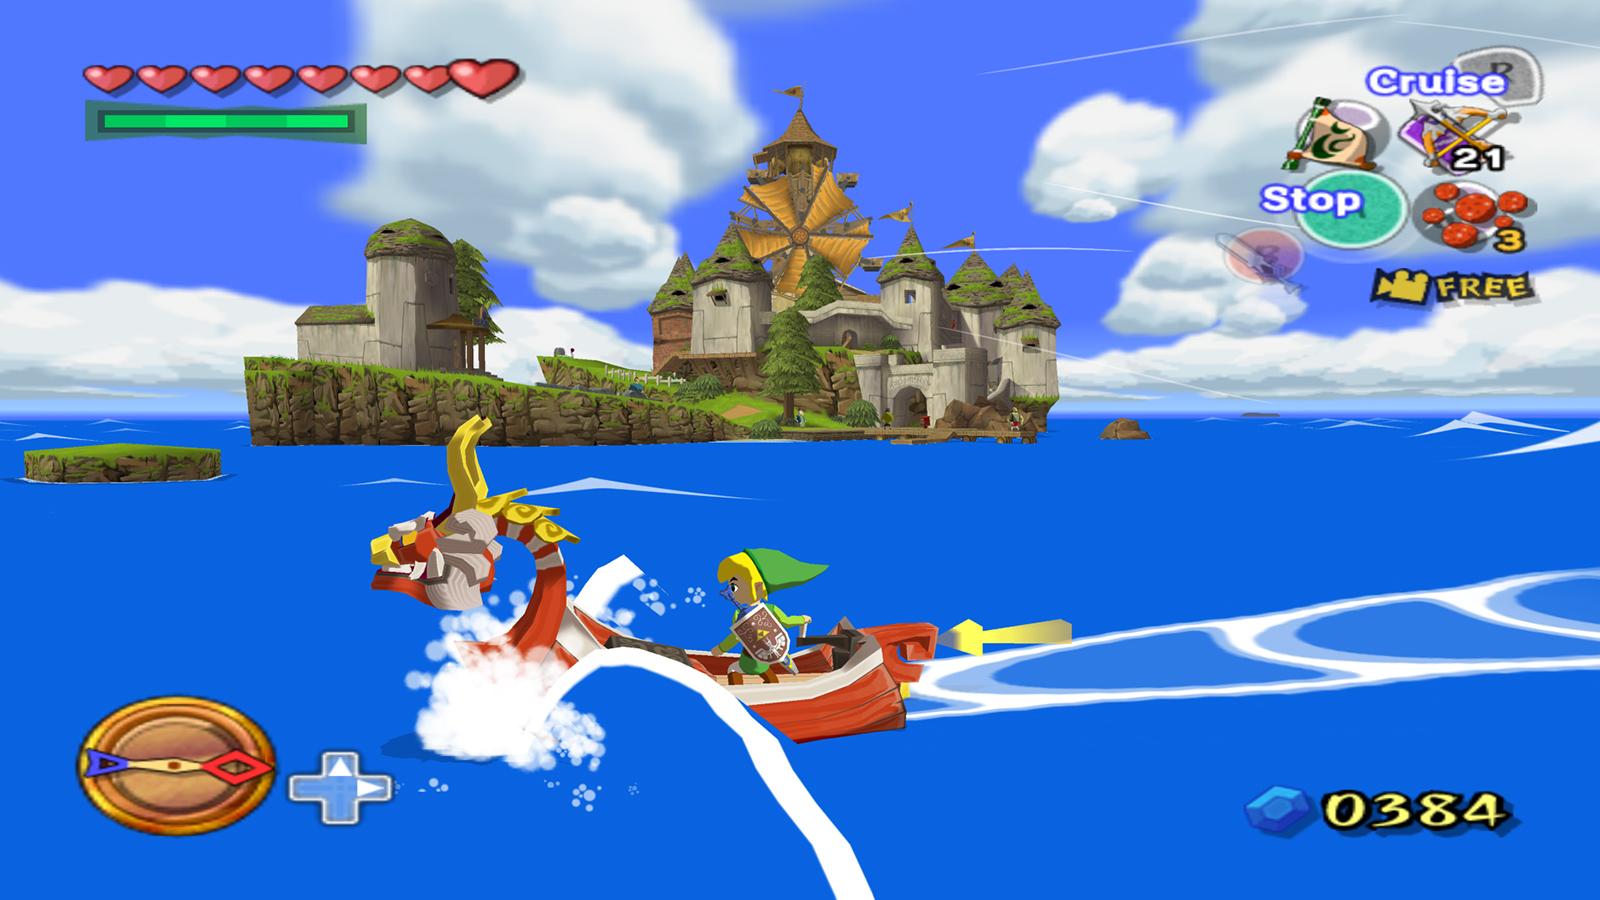 The Legend of Zelda: The Wind Waker,' one of the best Wii U games